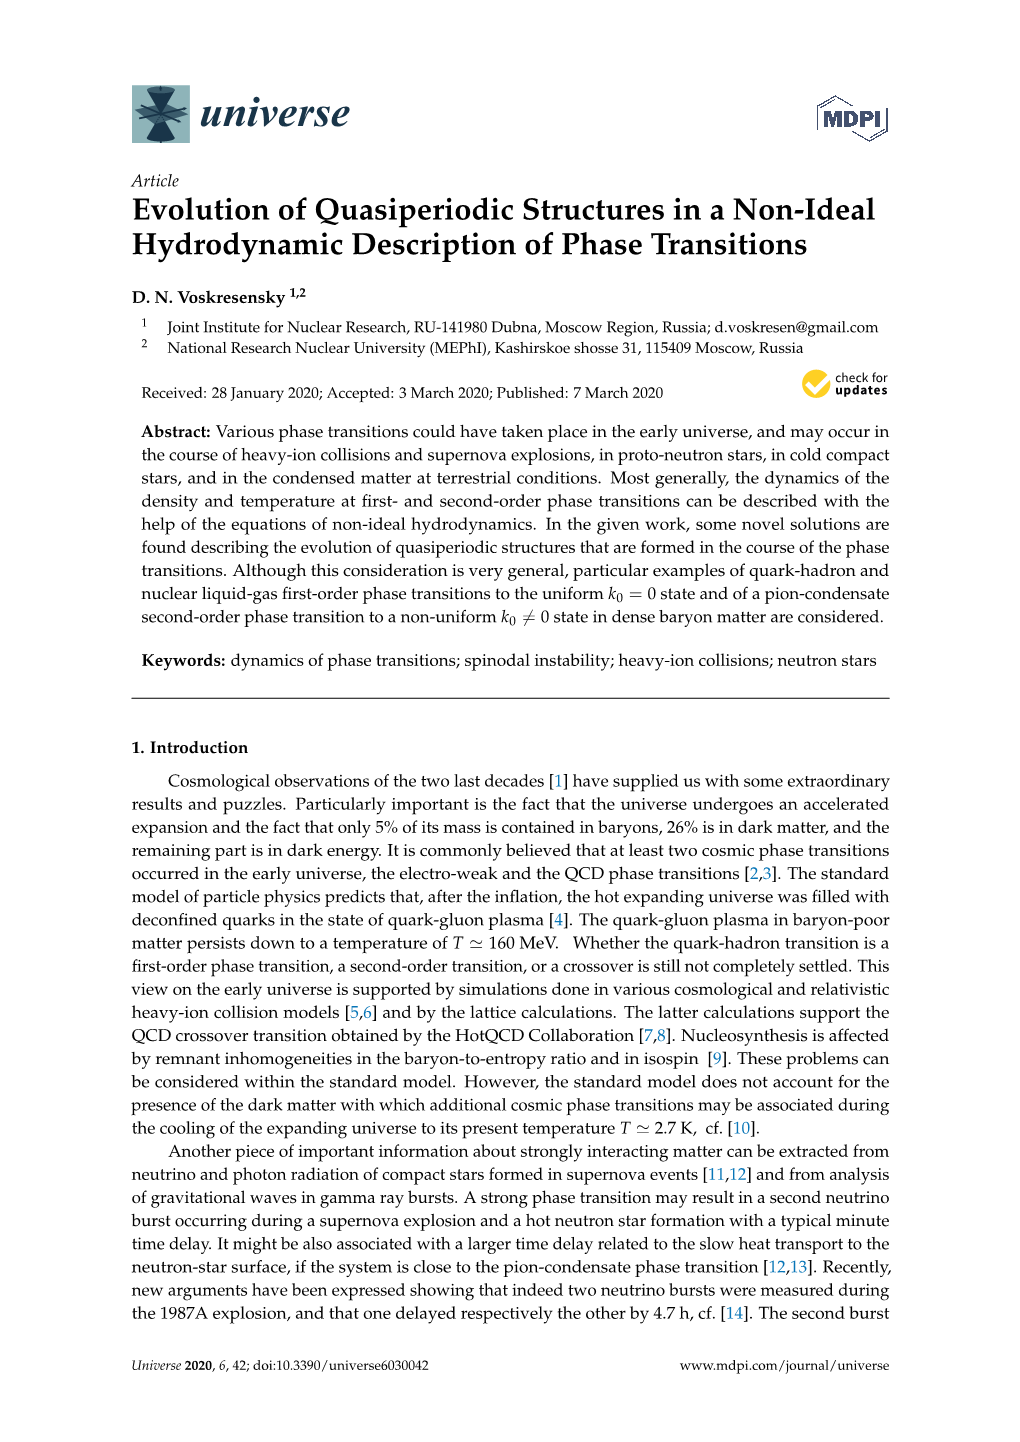 Evolution of Quasiperiodic Structures in a Non-Ideal Hydrodynamic Description of Phase Transitions